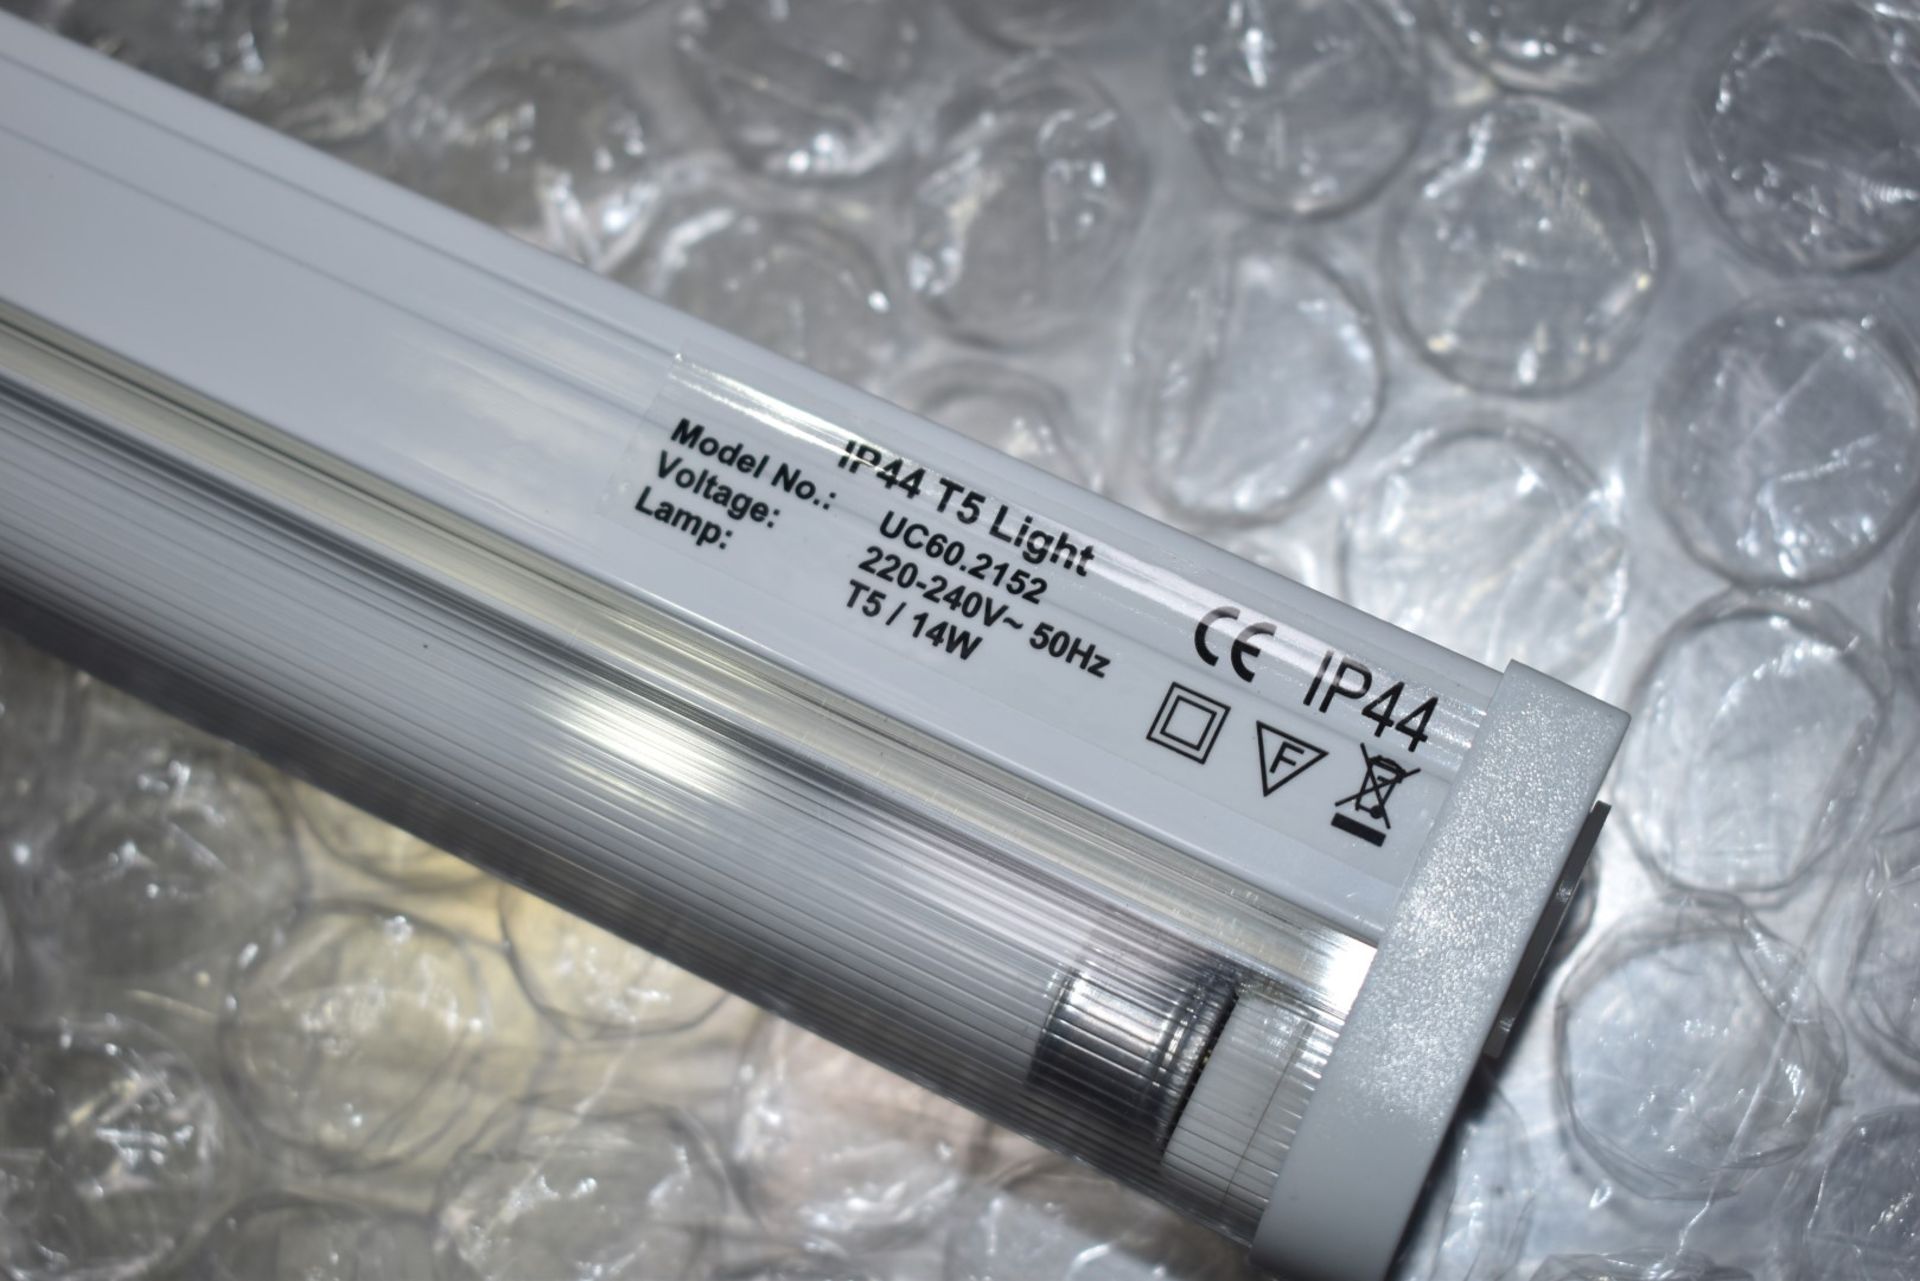 4 x Bathroom Light Fittings - IP44 Waterproof T5 14w Fluorescent Lights With Built-In Electronic - Image 5 of 11